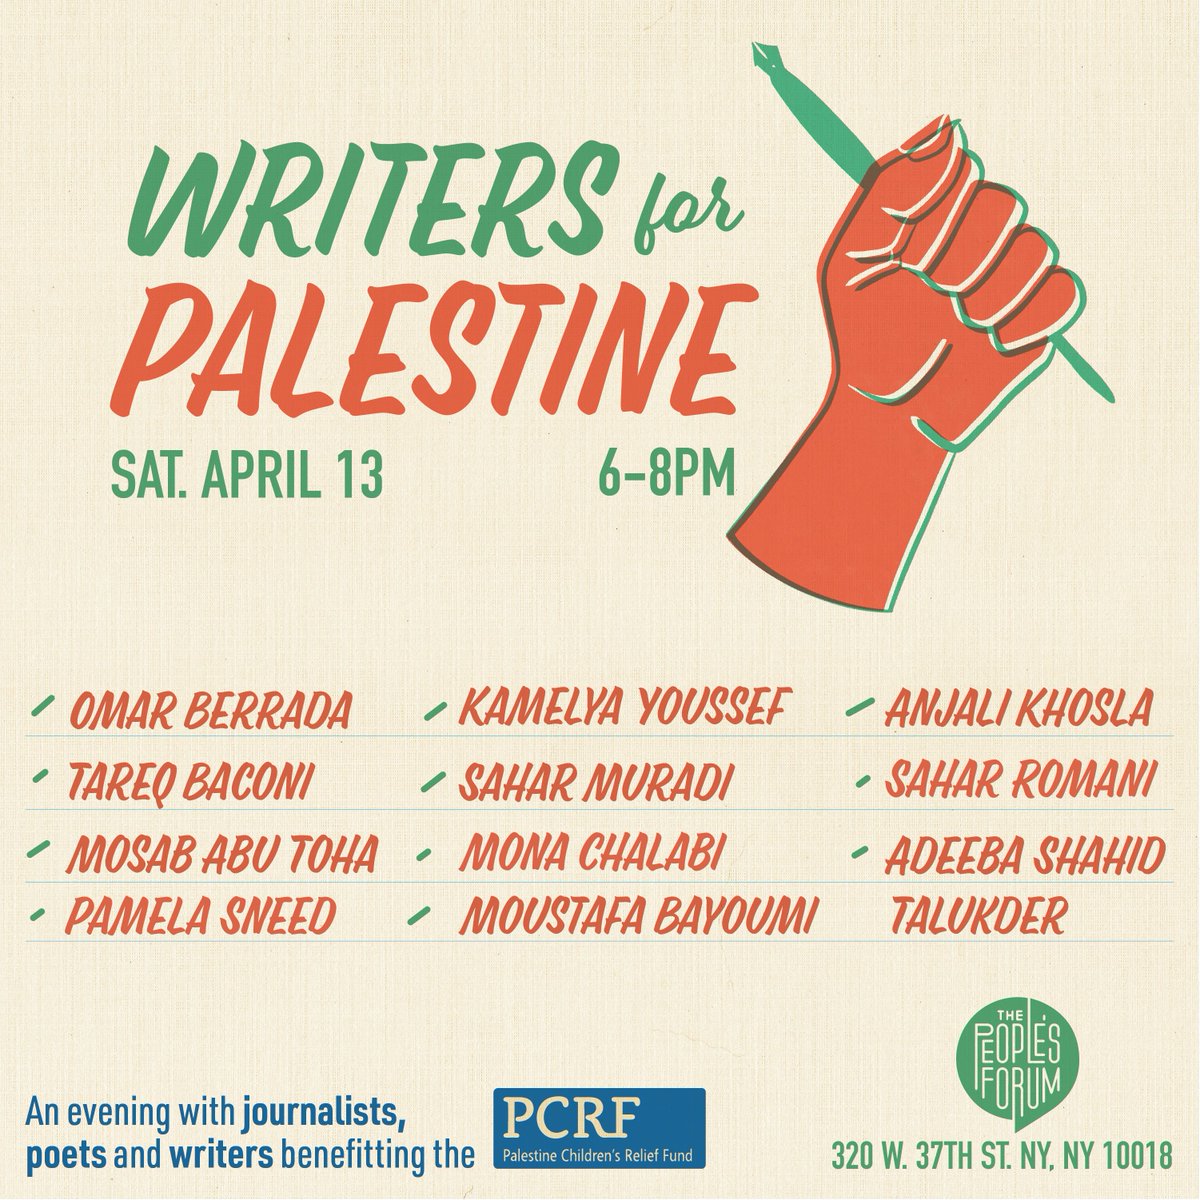 The line-up. The cause. Bring your bodies & your support. For the Palestine Children's Relief Fund. I was so honored to be part of the first Writers for Palestine reading at the People's Forum, and am glad to see this next one on the books.